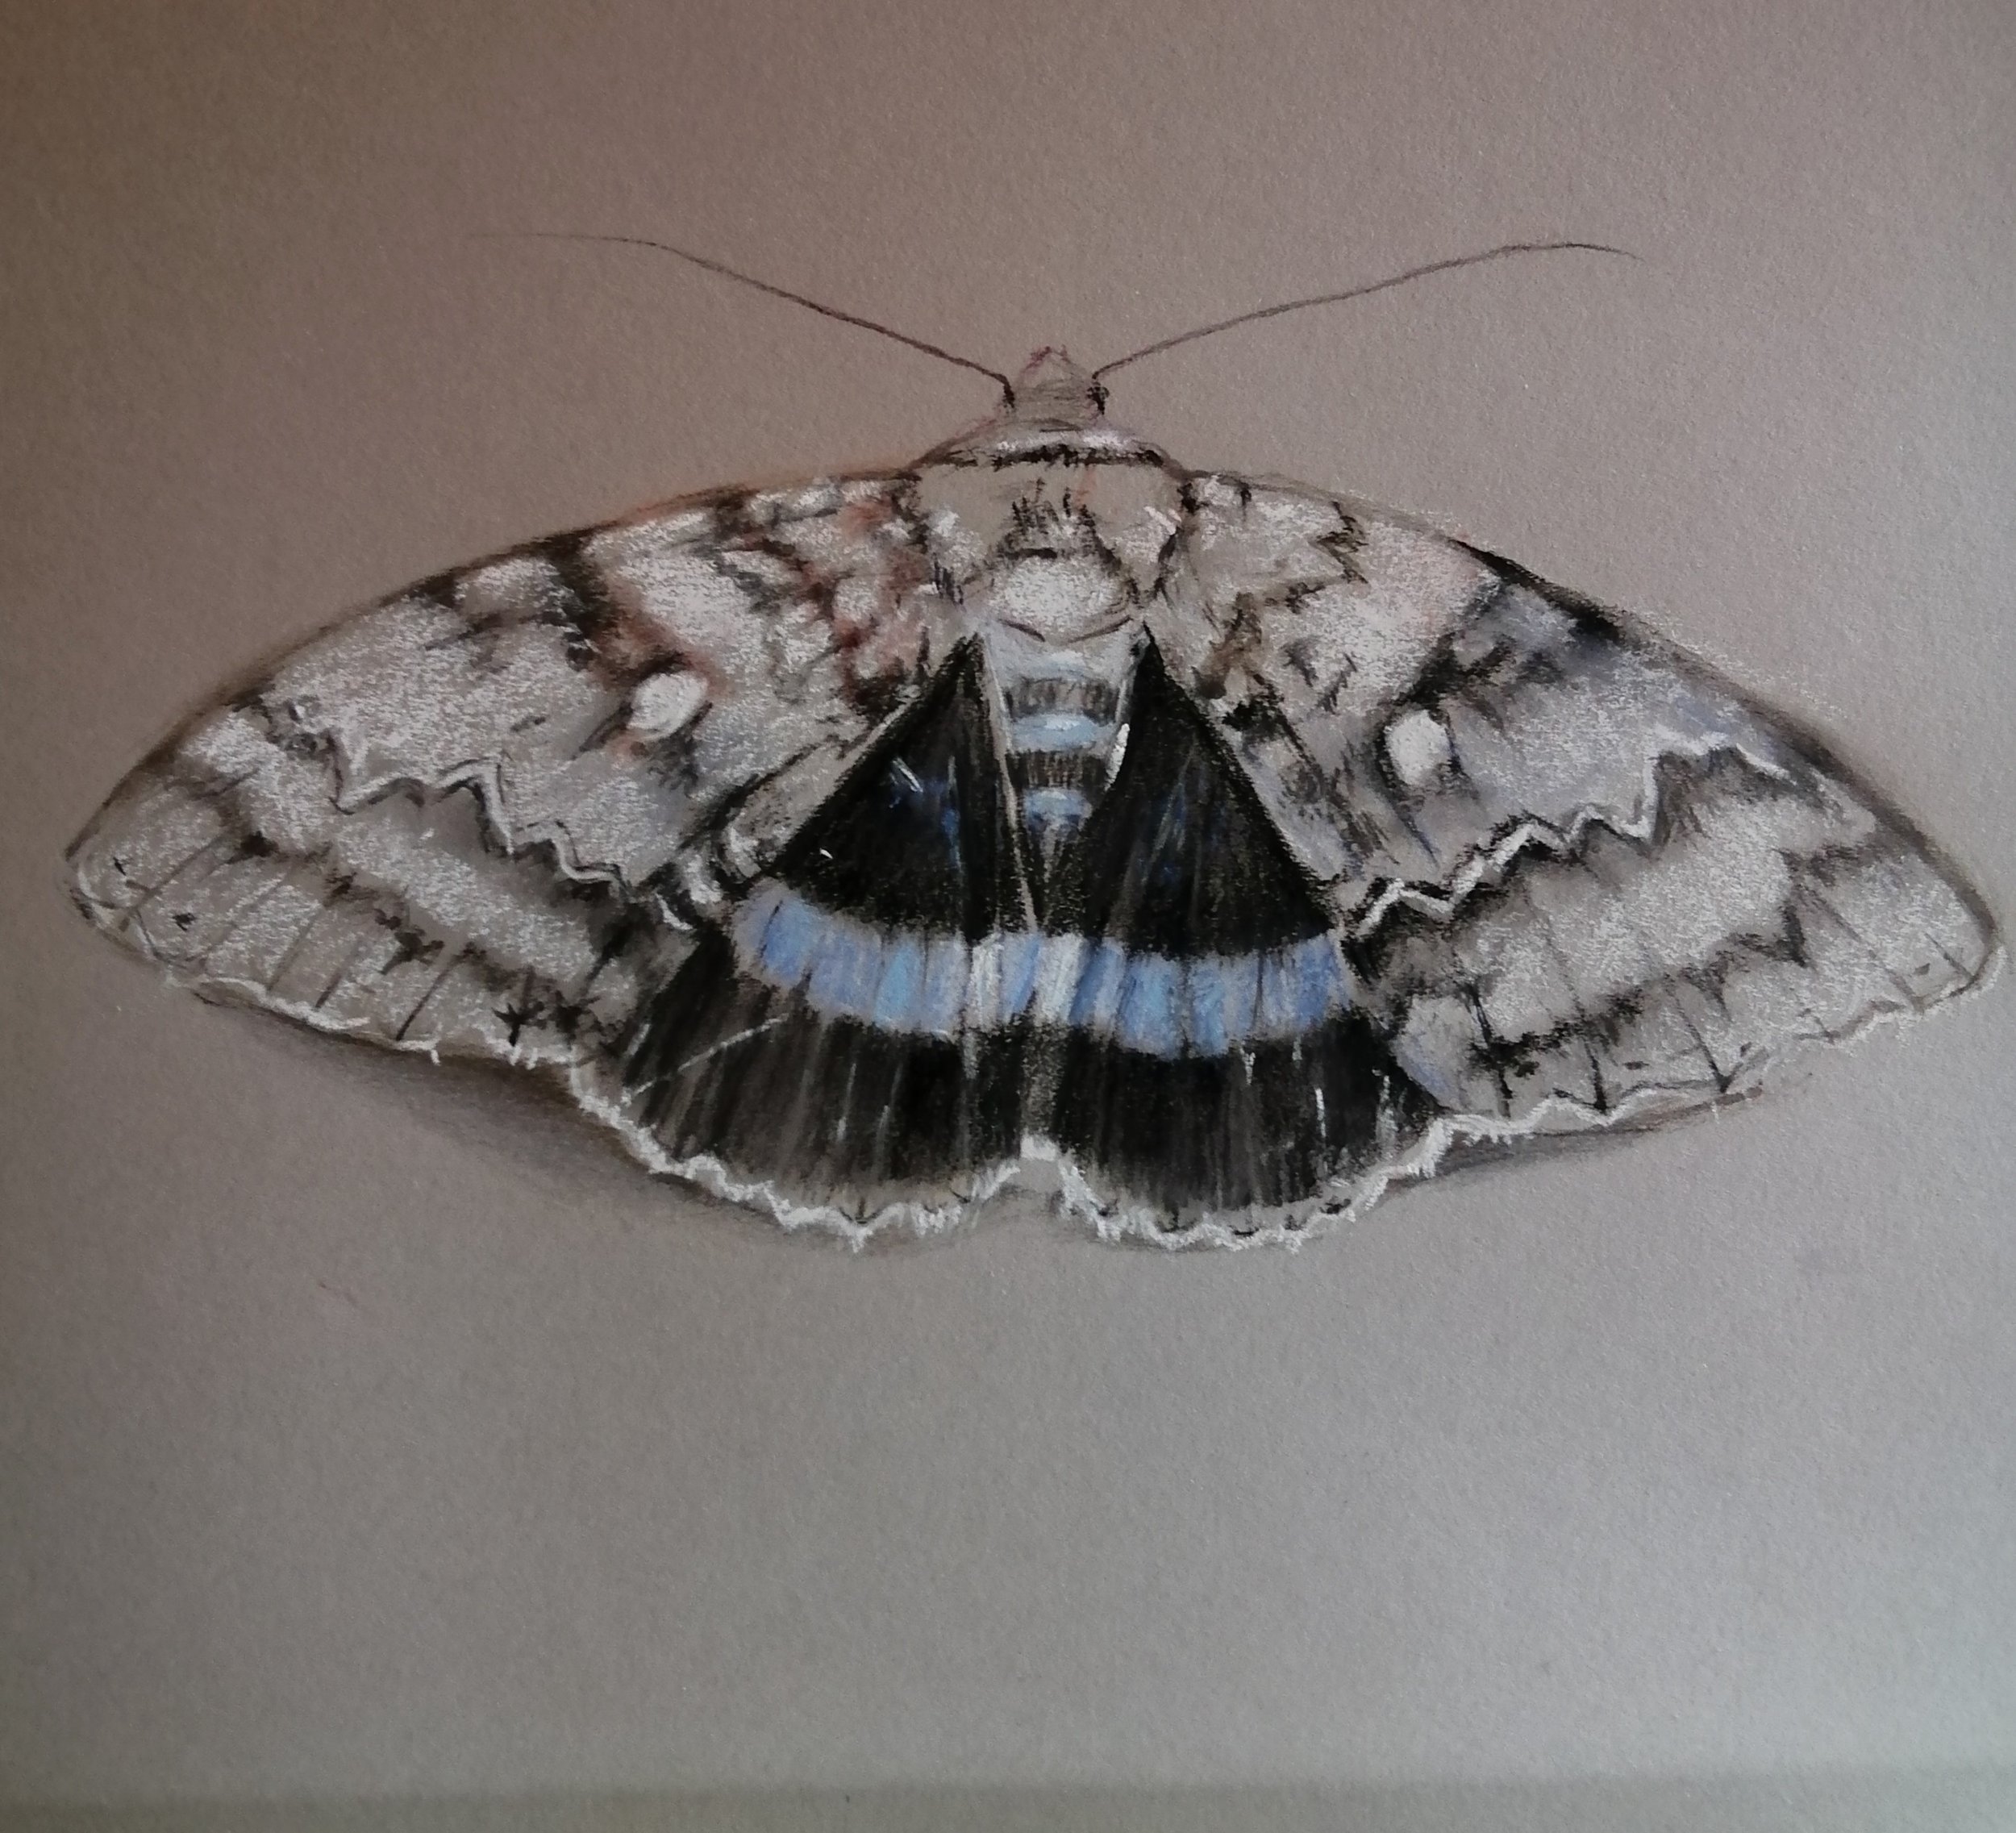  Moth, day 3  Pastel and charcoal 